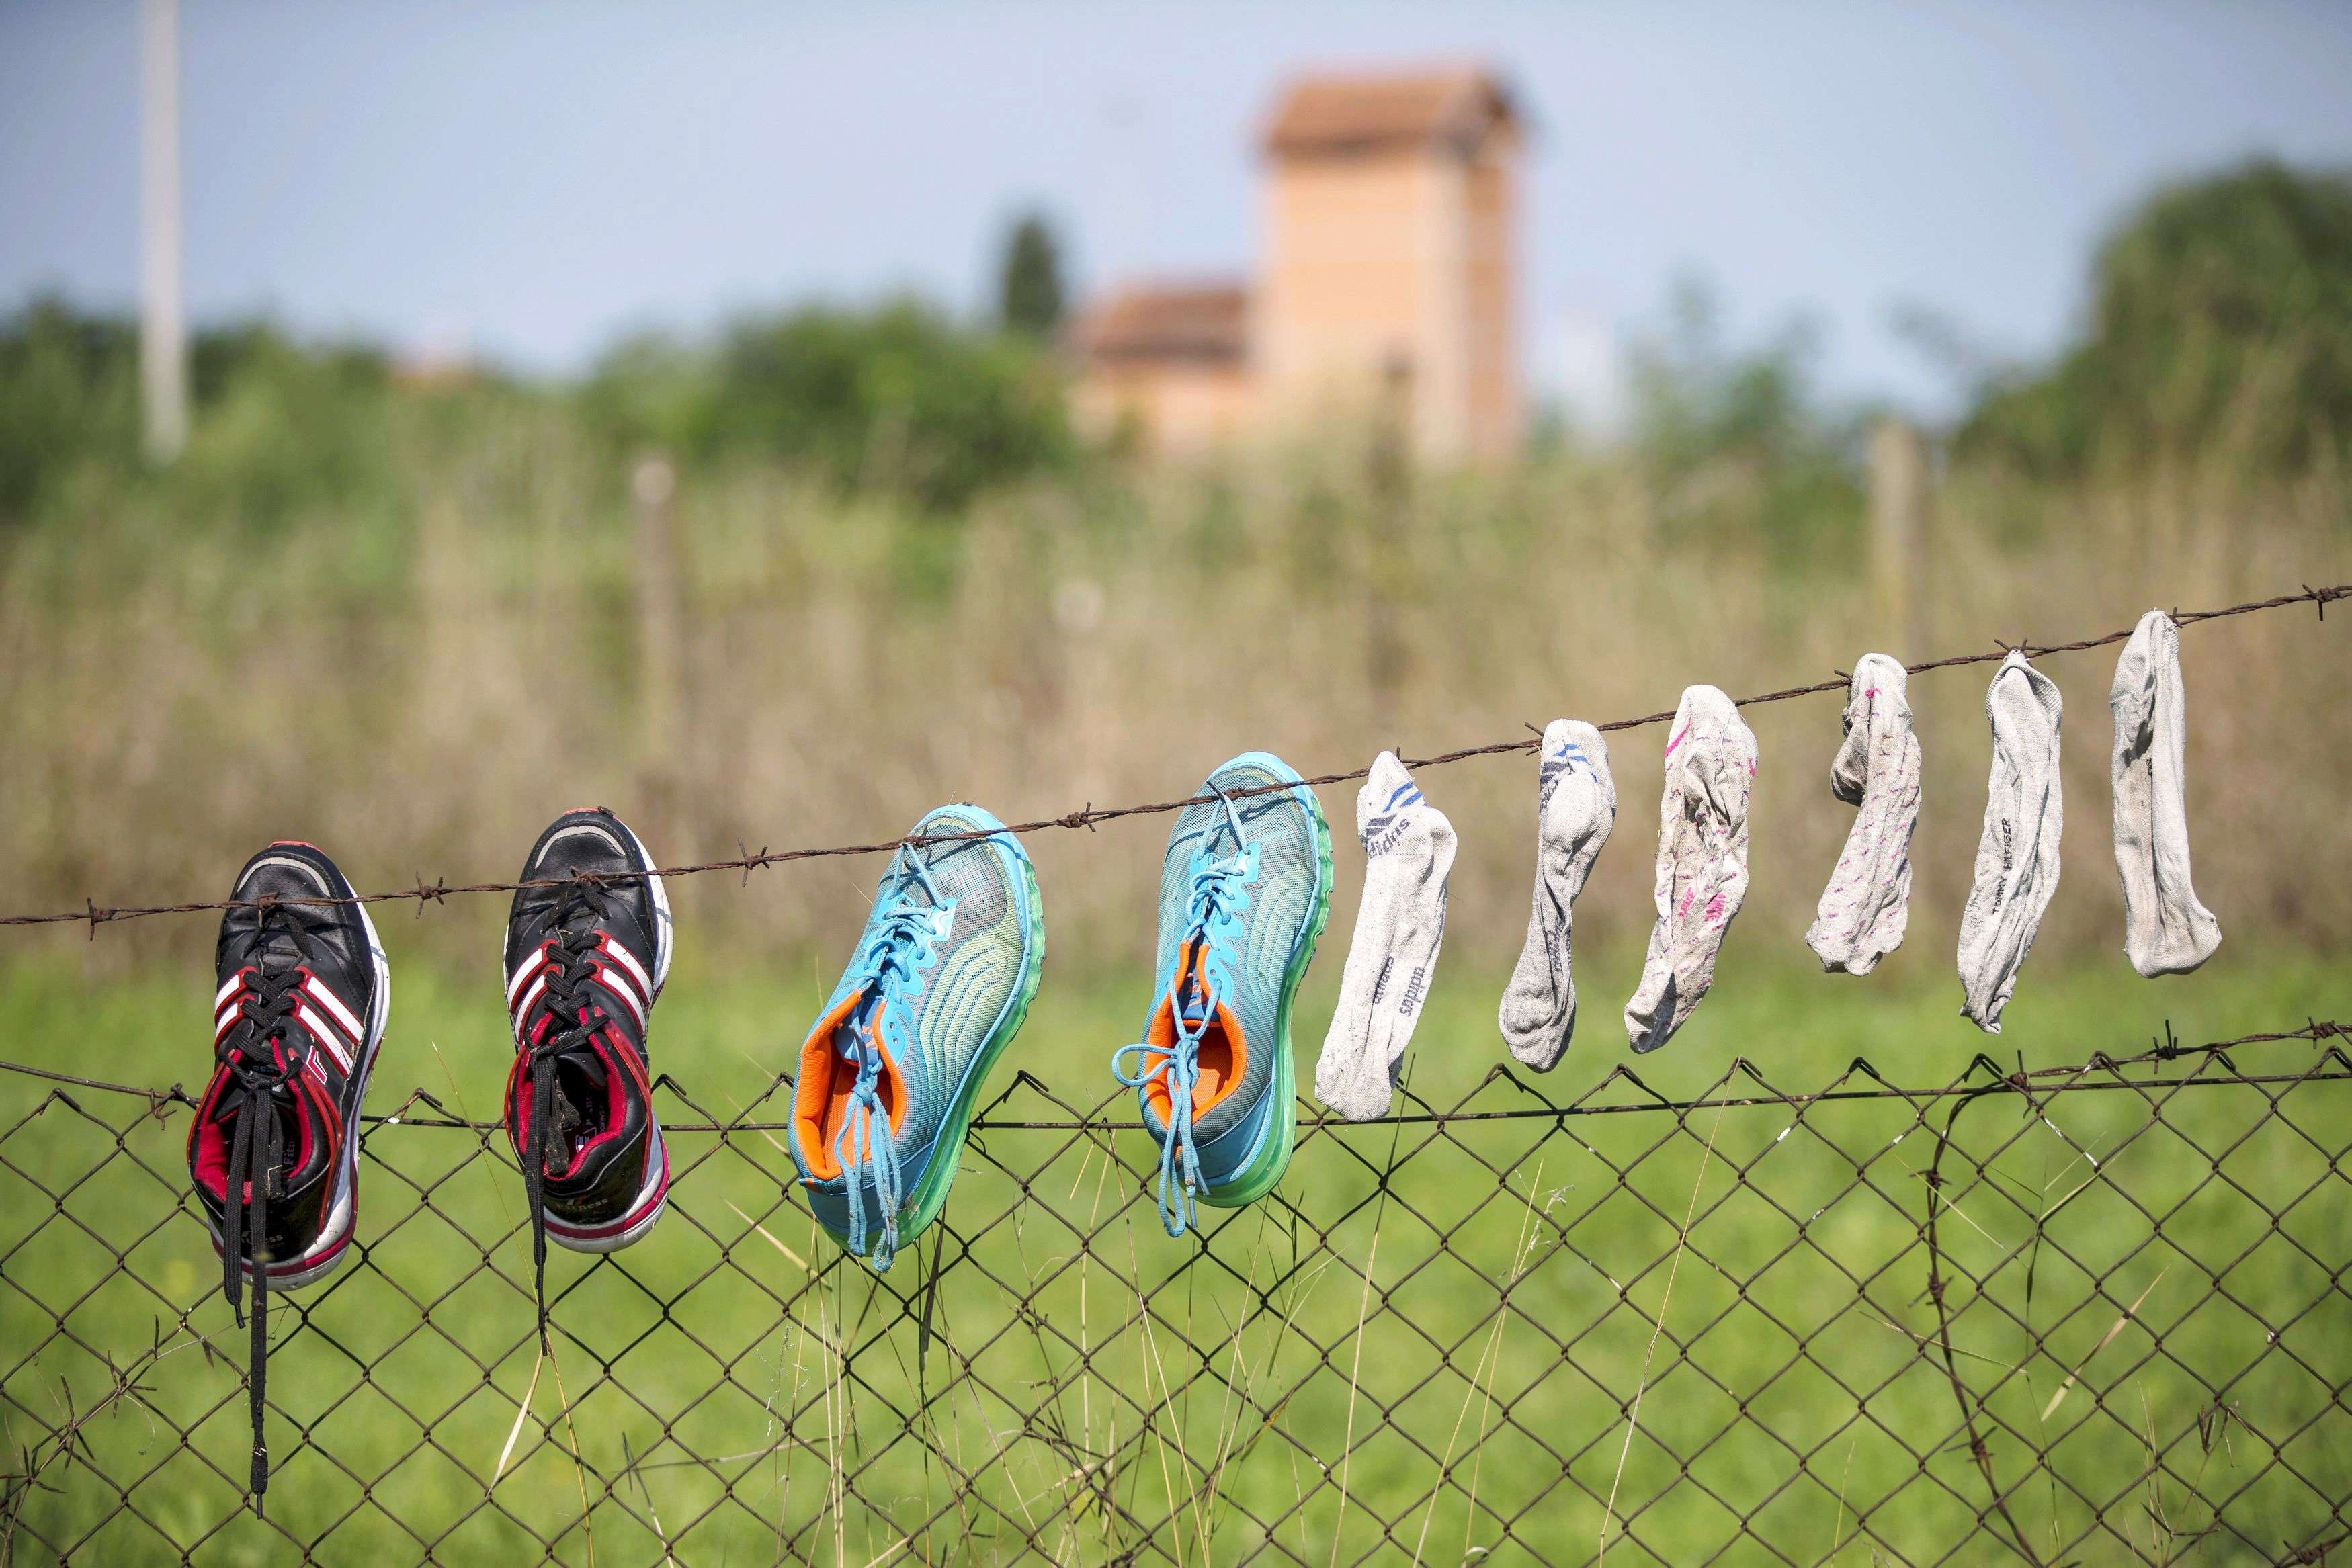 Shoes and socks belonging to Syrian migrants are hung to dry near the Serbian border with Hungary, near the village of Horgos. (REUTERS/Marko Djurica)